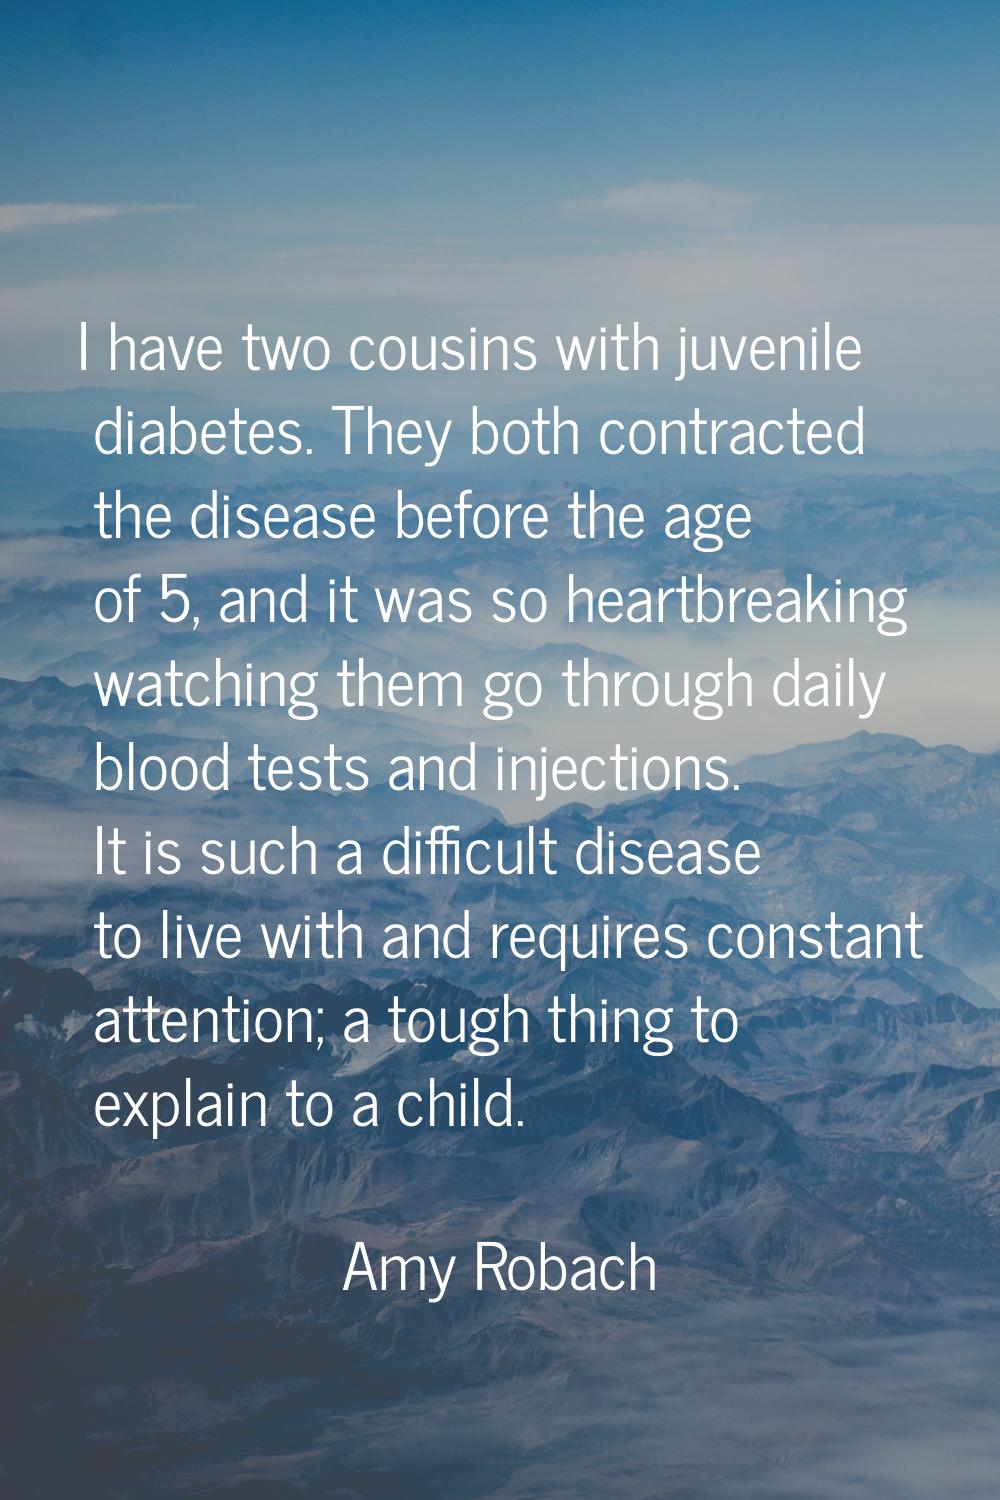 I have two cousins with juvenile diabetes. They both contracted the disease before the age of 5, an